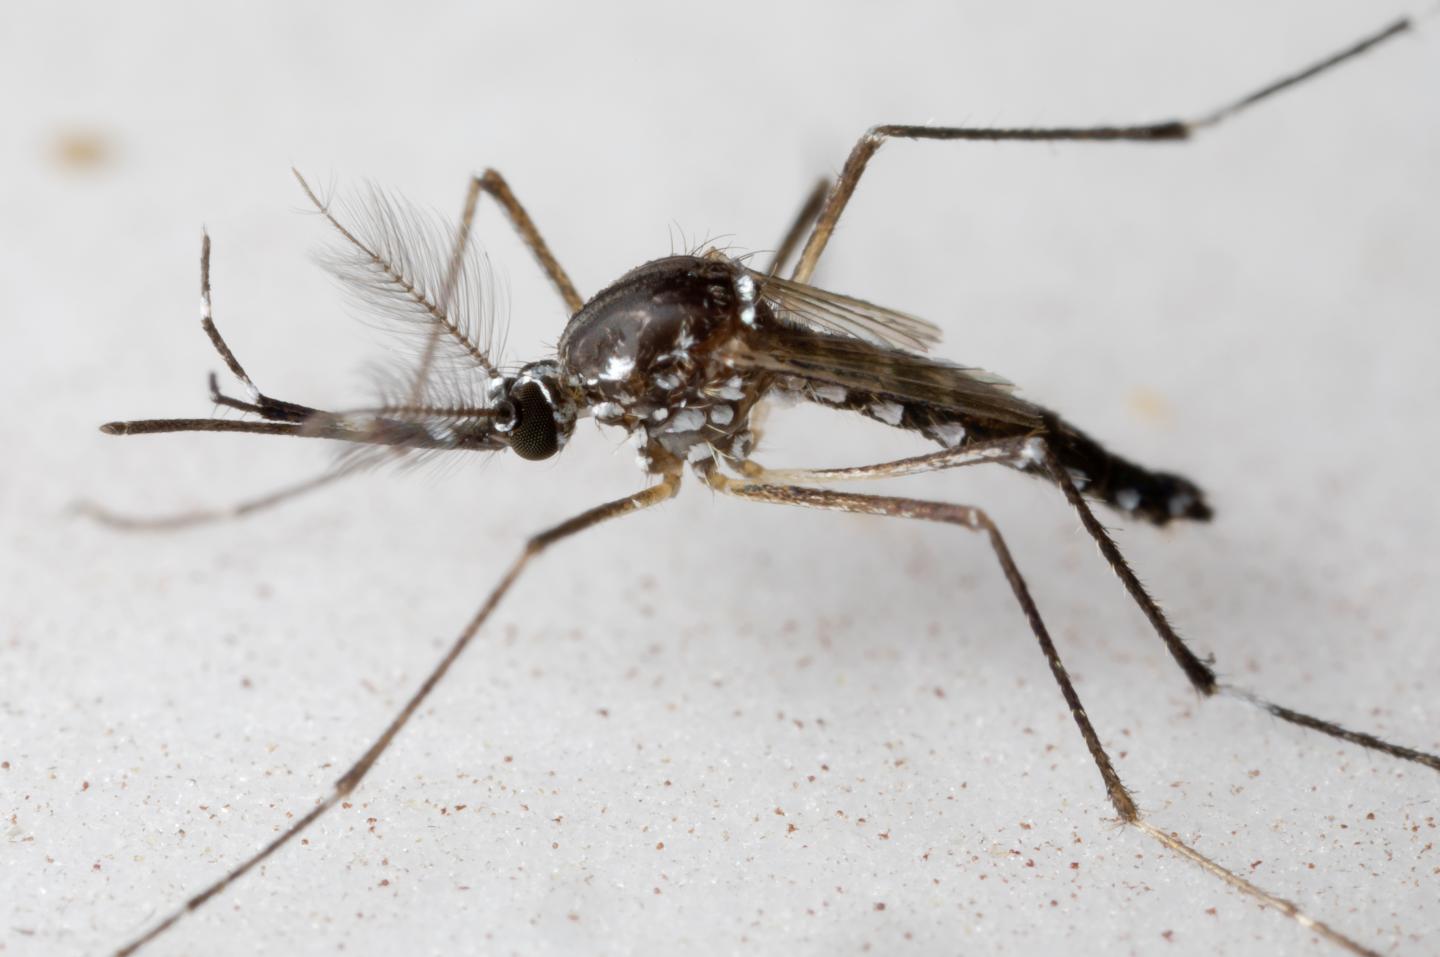 How many mosquitoes can you squish into a syringe? Scientists may finally have an answer.